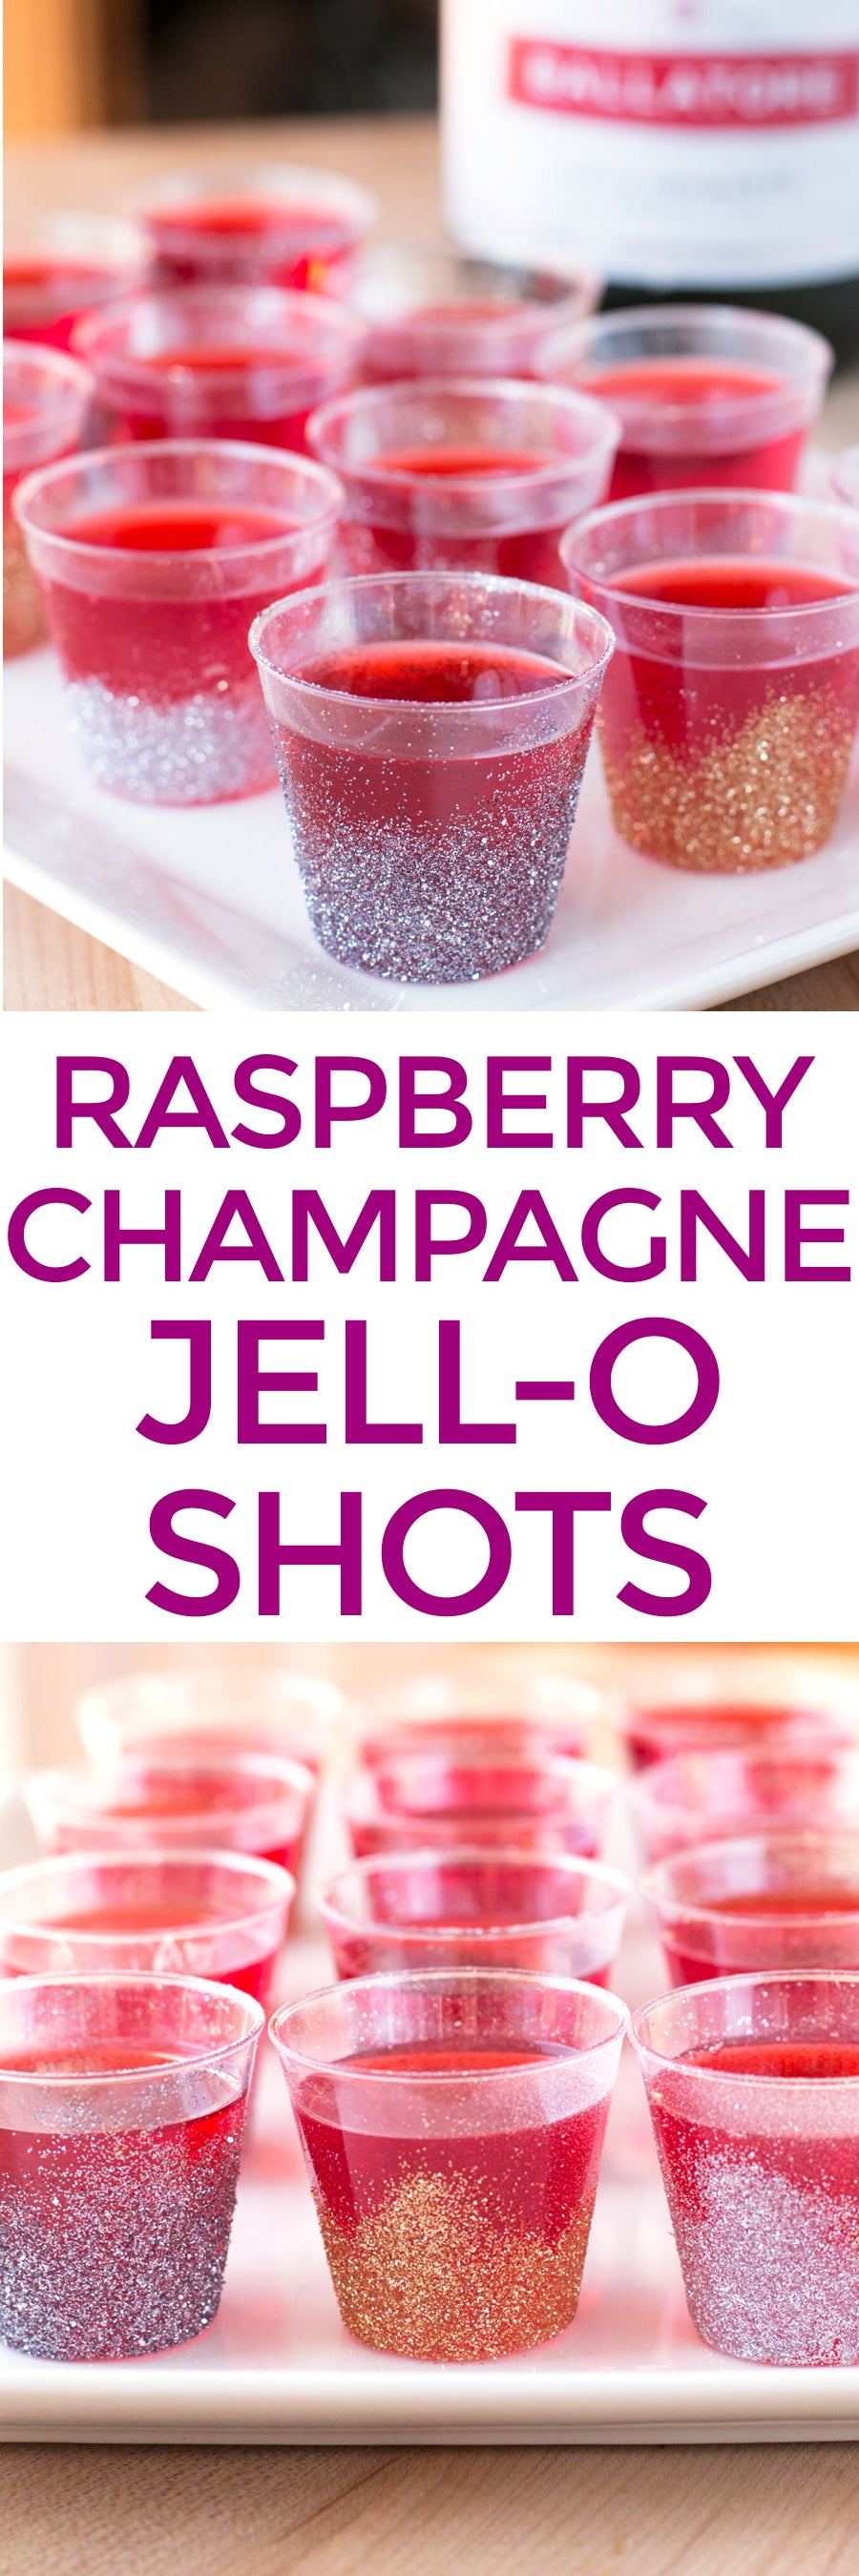 Raspberry Champagne Jell-O Shots | pigofthemonth.com #newyearseve #party #cocktail #recipe